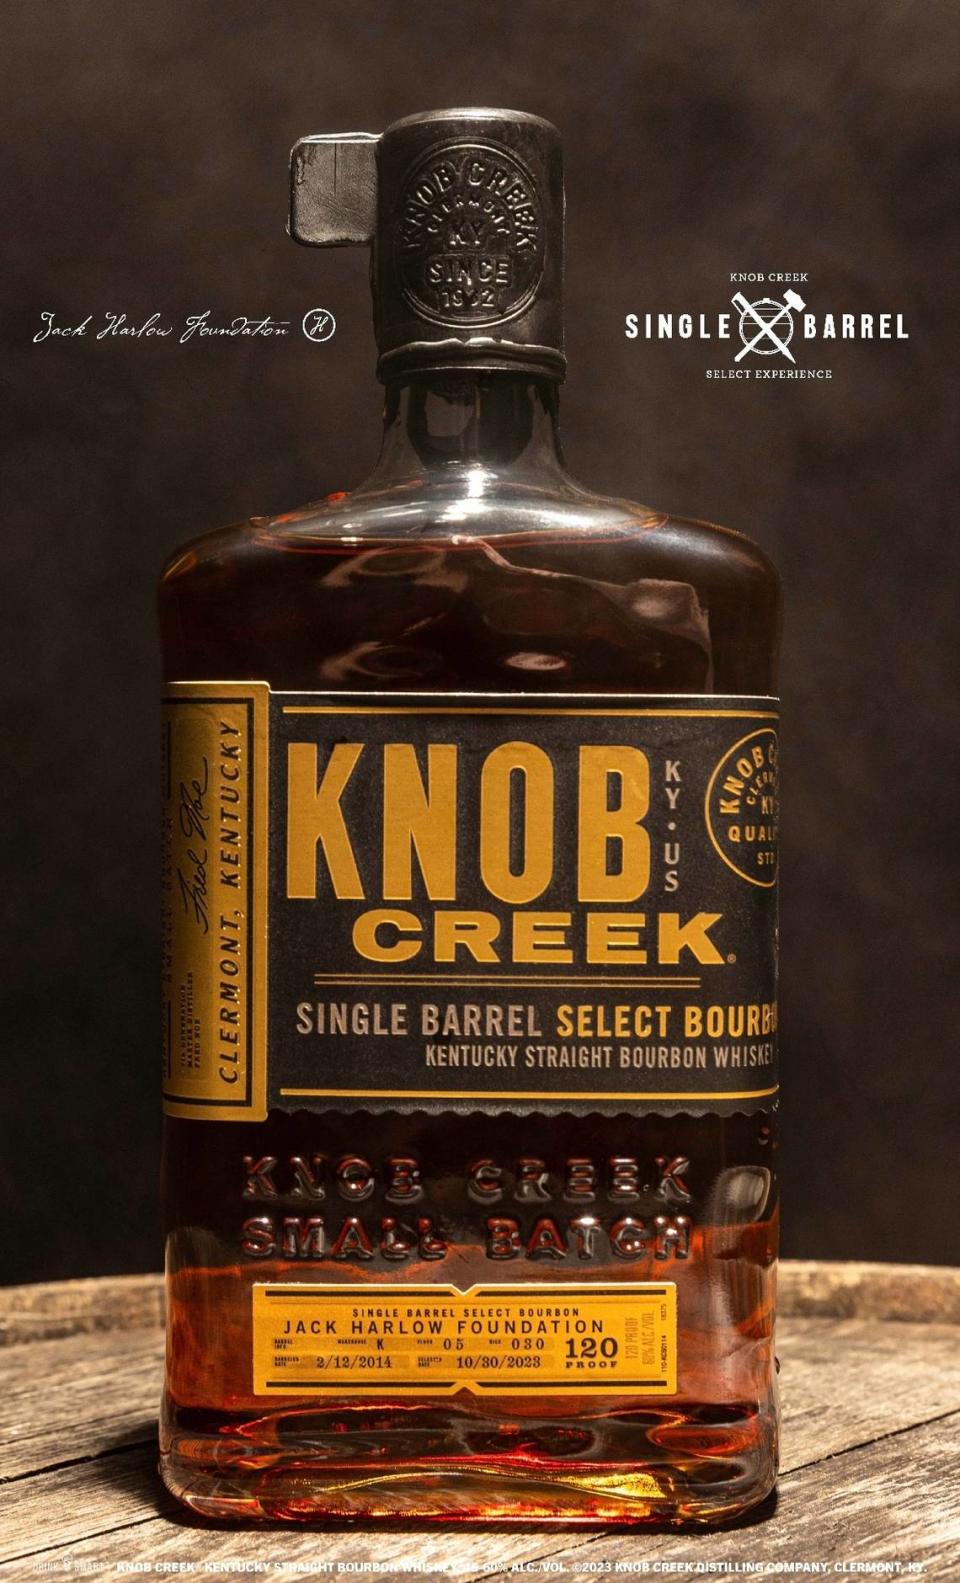 The Knob Creek Single Barrel selected for the Jack Harlow Foundation will be on sale in Lexington and nearby Central Kentucky locations on Dec. 3.